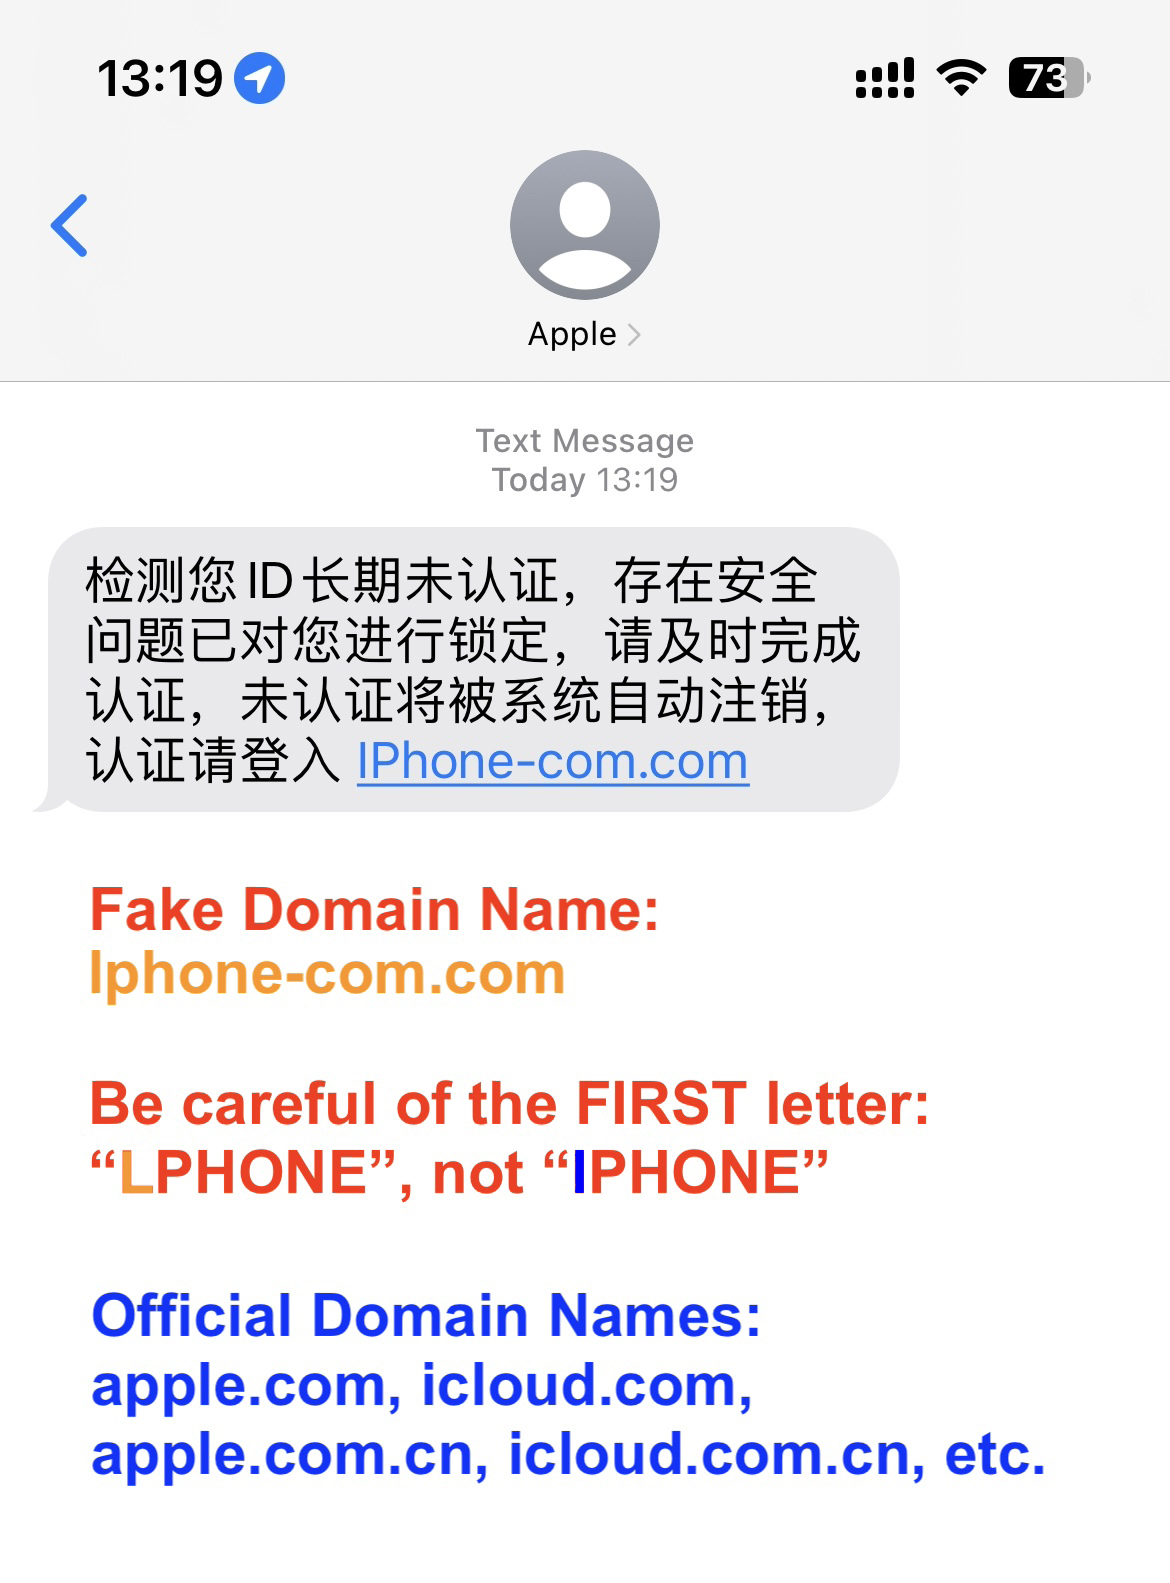 Phishing SMS Impersonating Apple